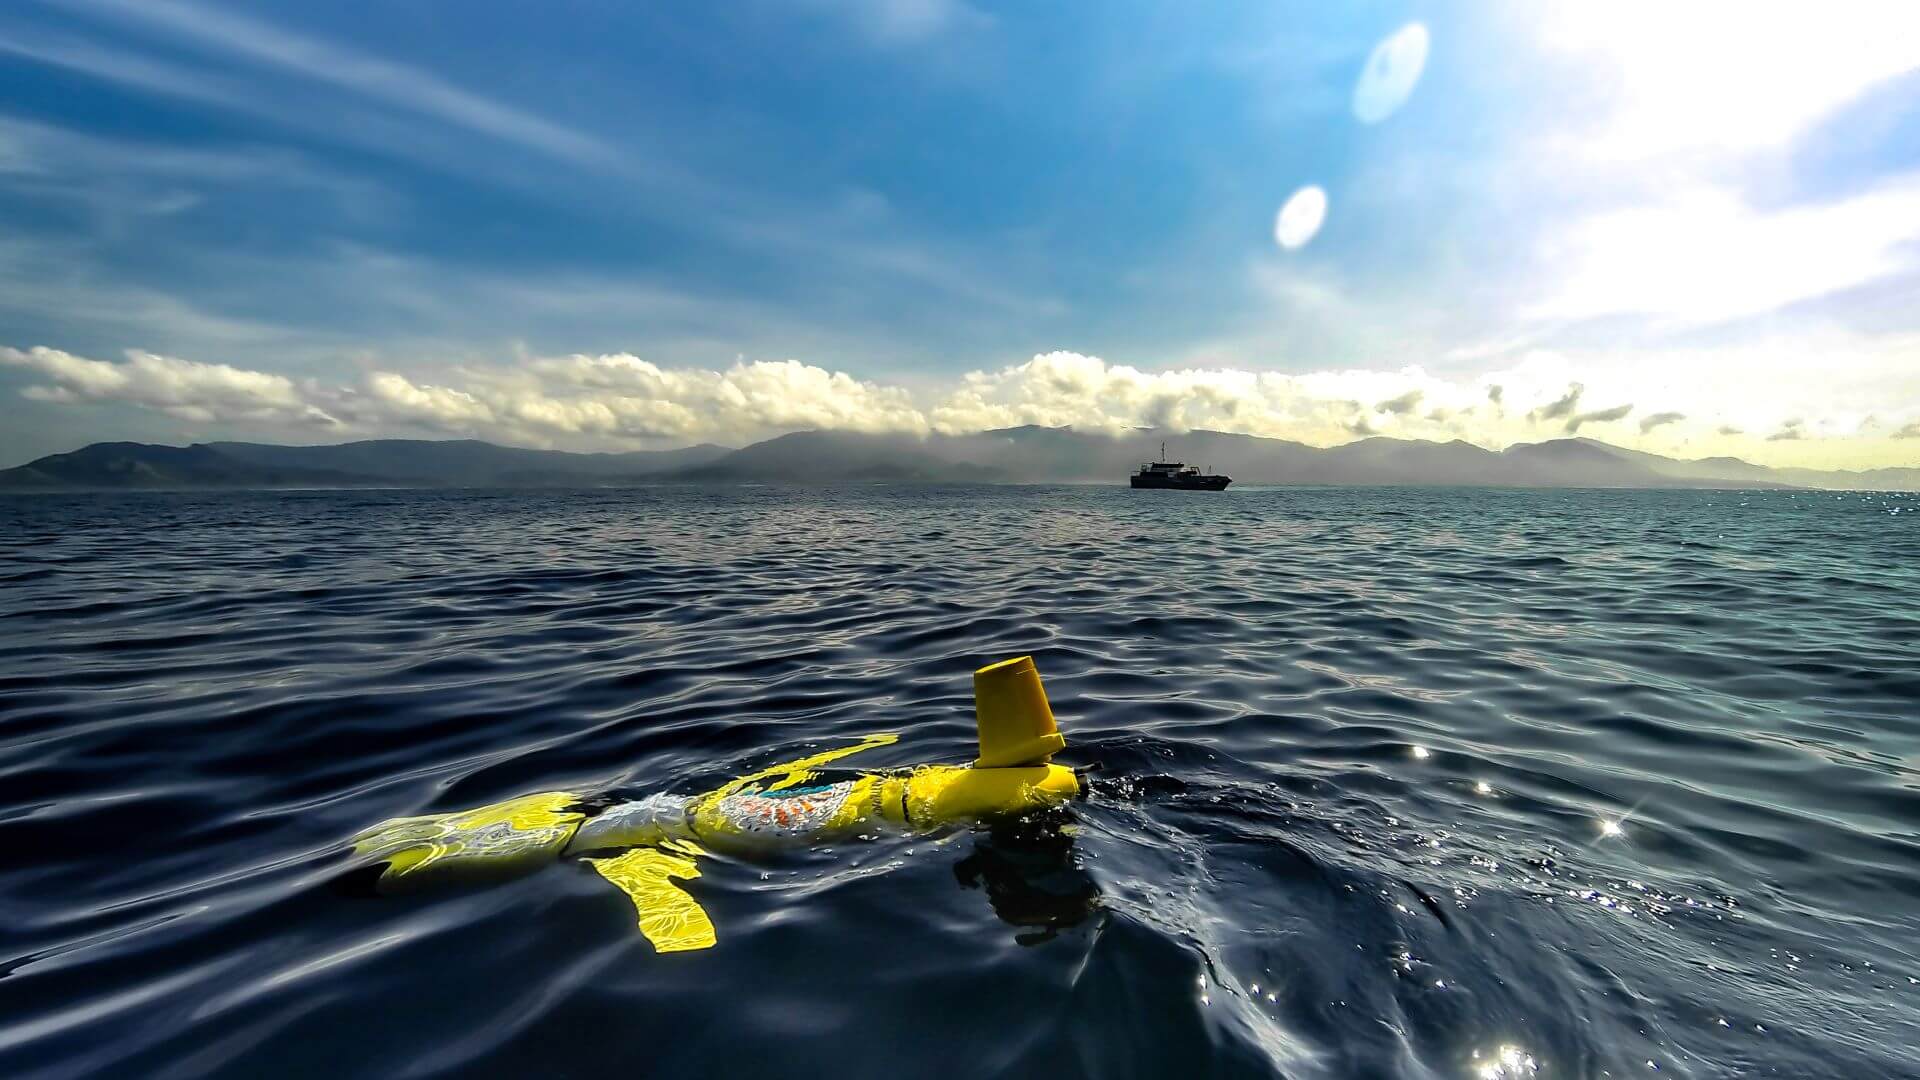 Ocean monitoring equipment floating just under sea surface, with blue skies above